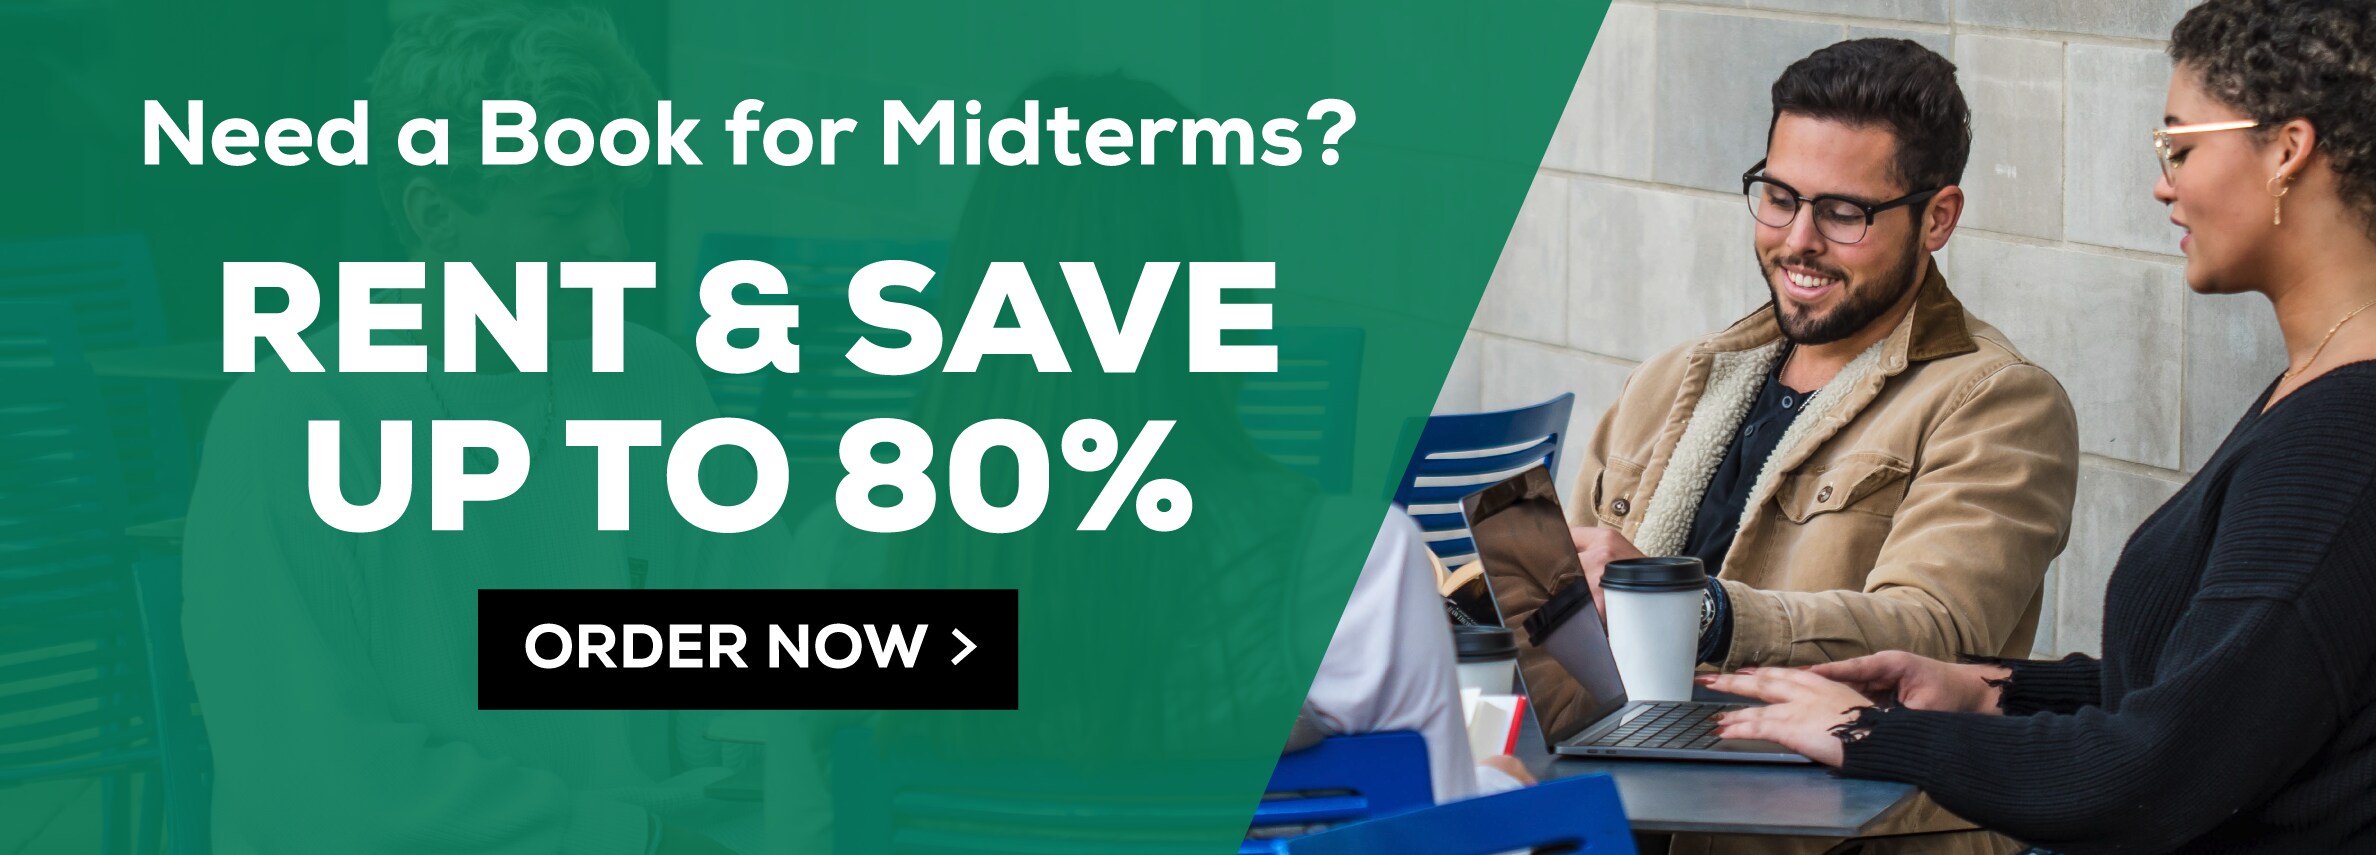 Need a book for Midterms? Rent and save up to 80%. Order Now./